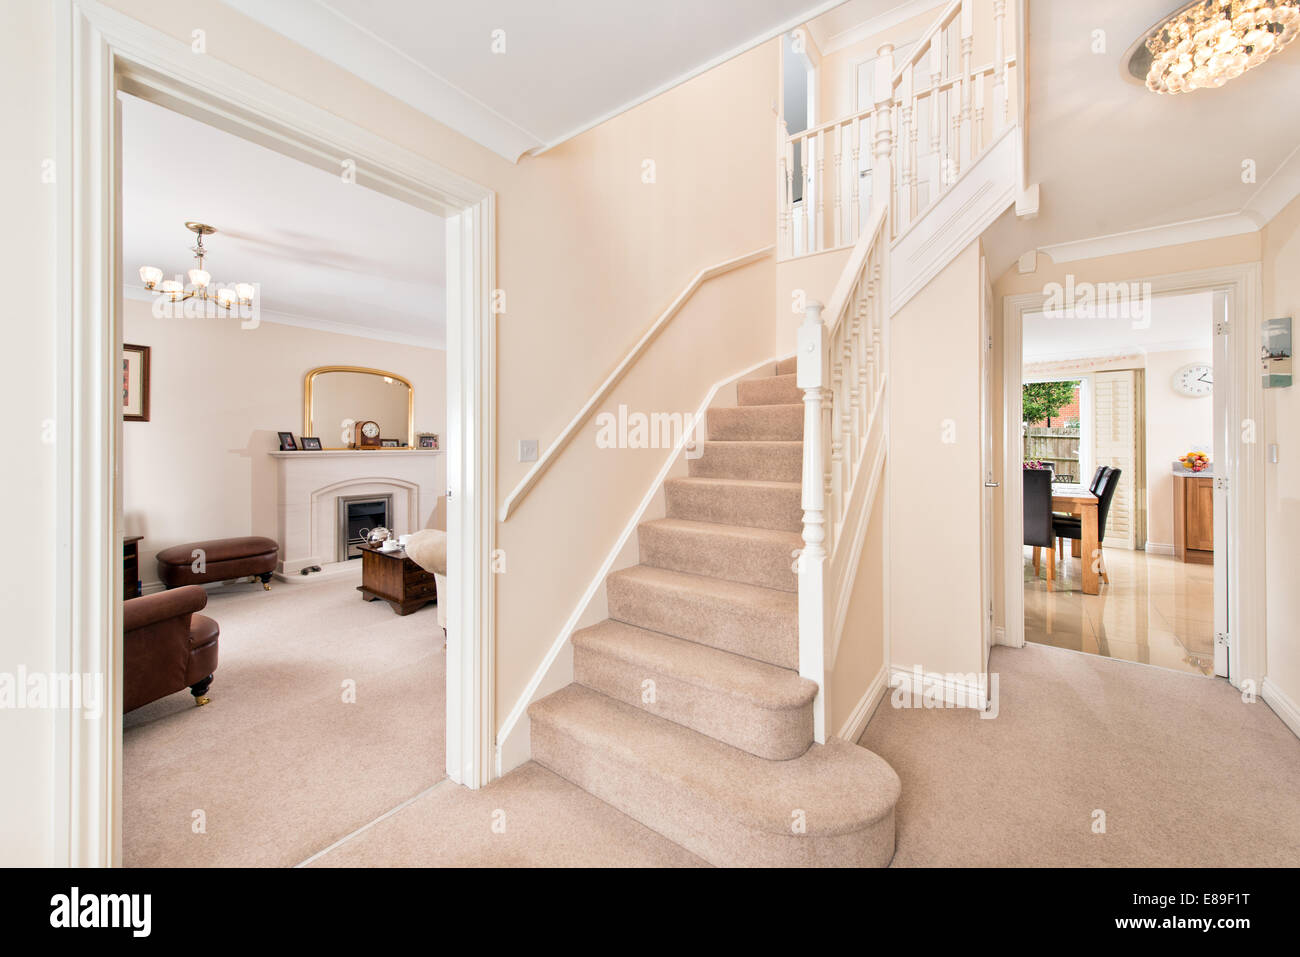 A tidy Entrance, hallway & stairs in a typical modern UK home Stock Photo